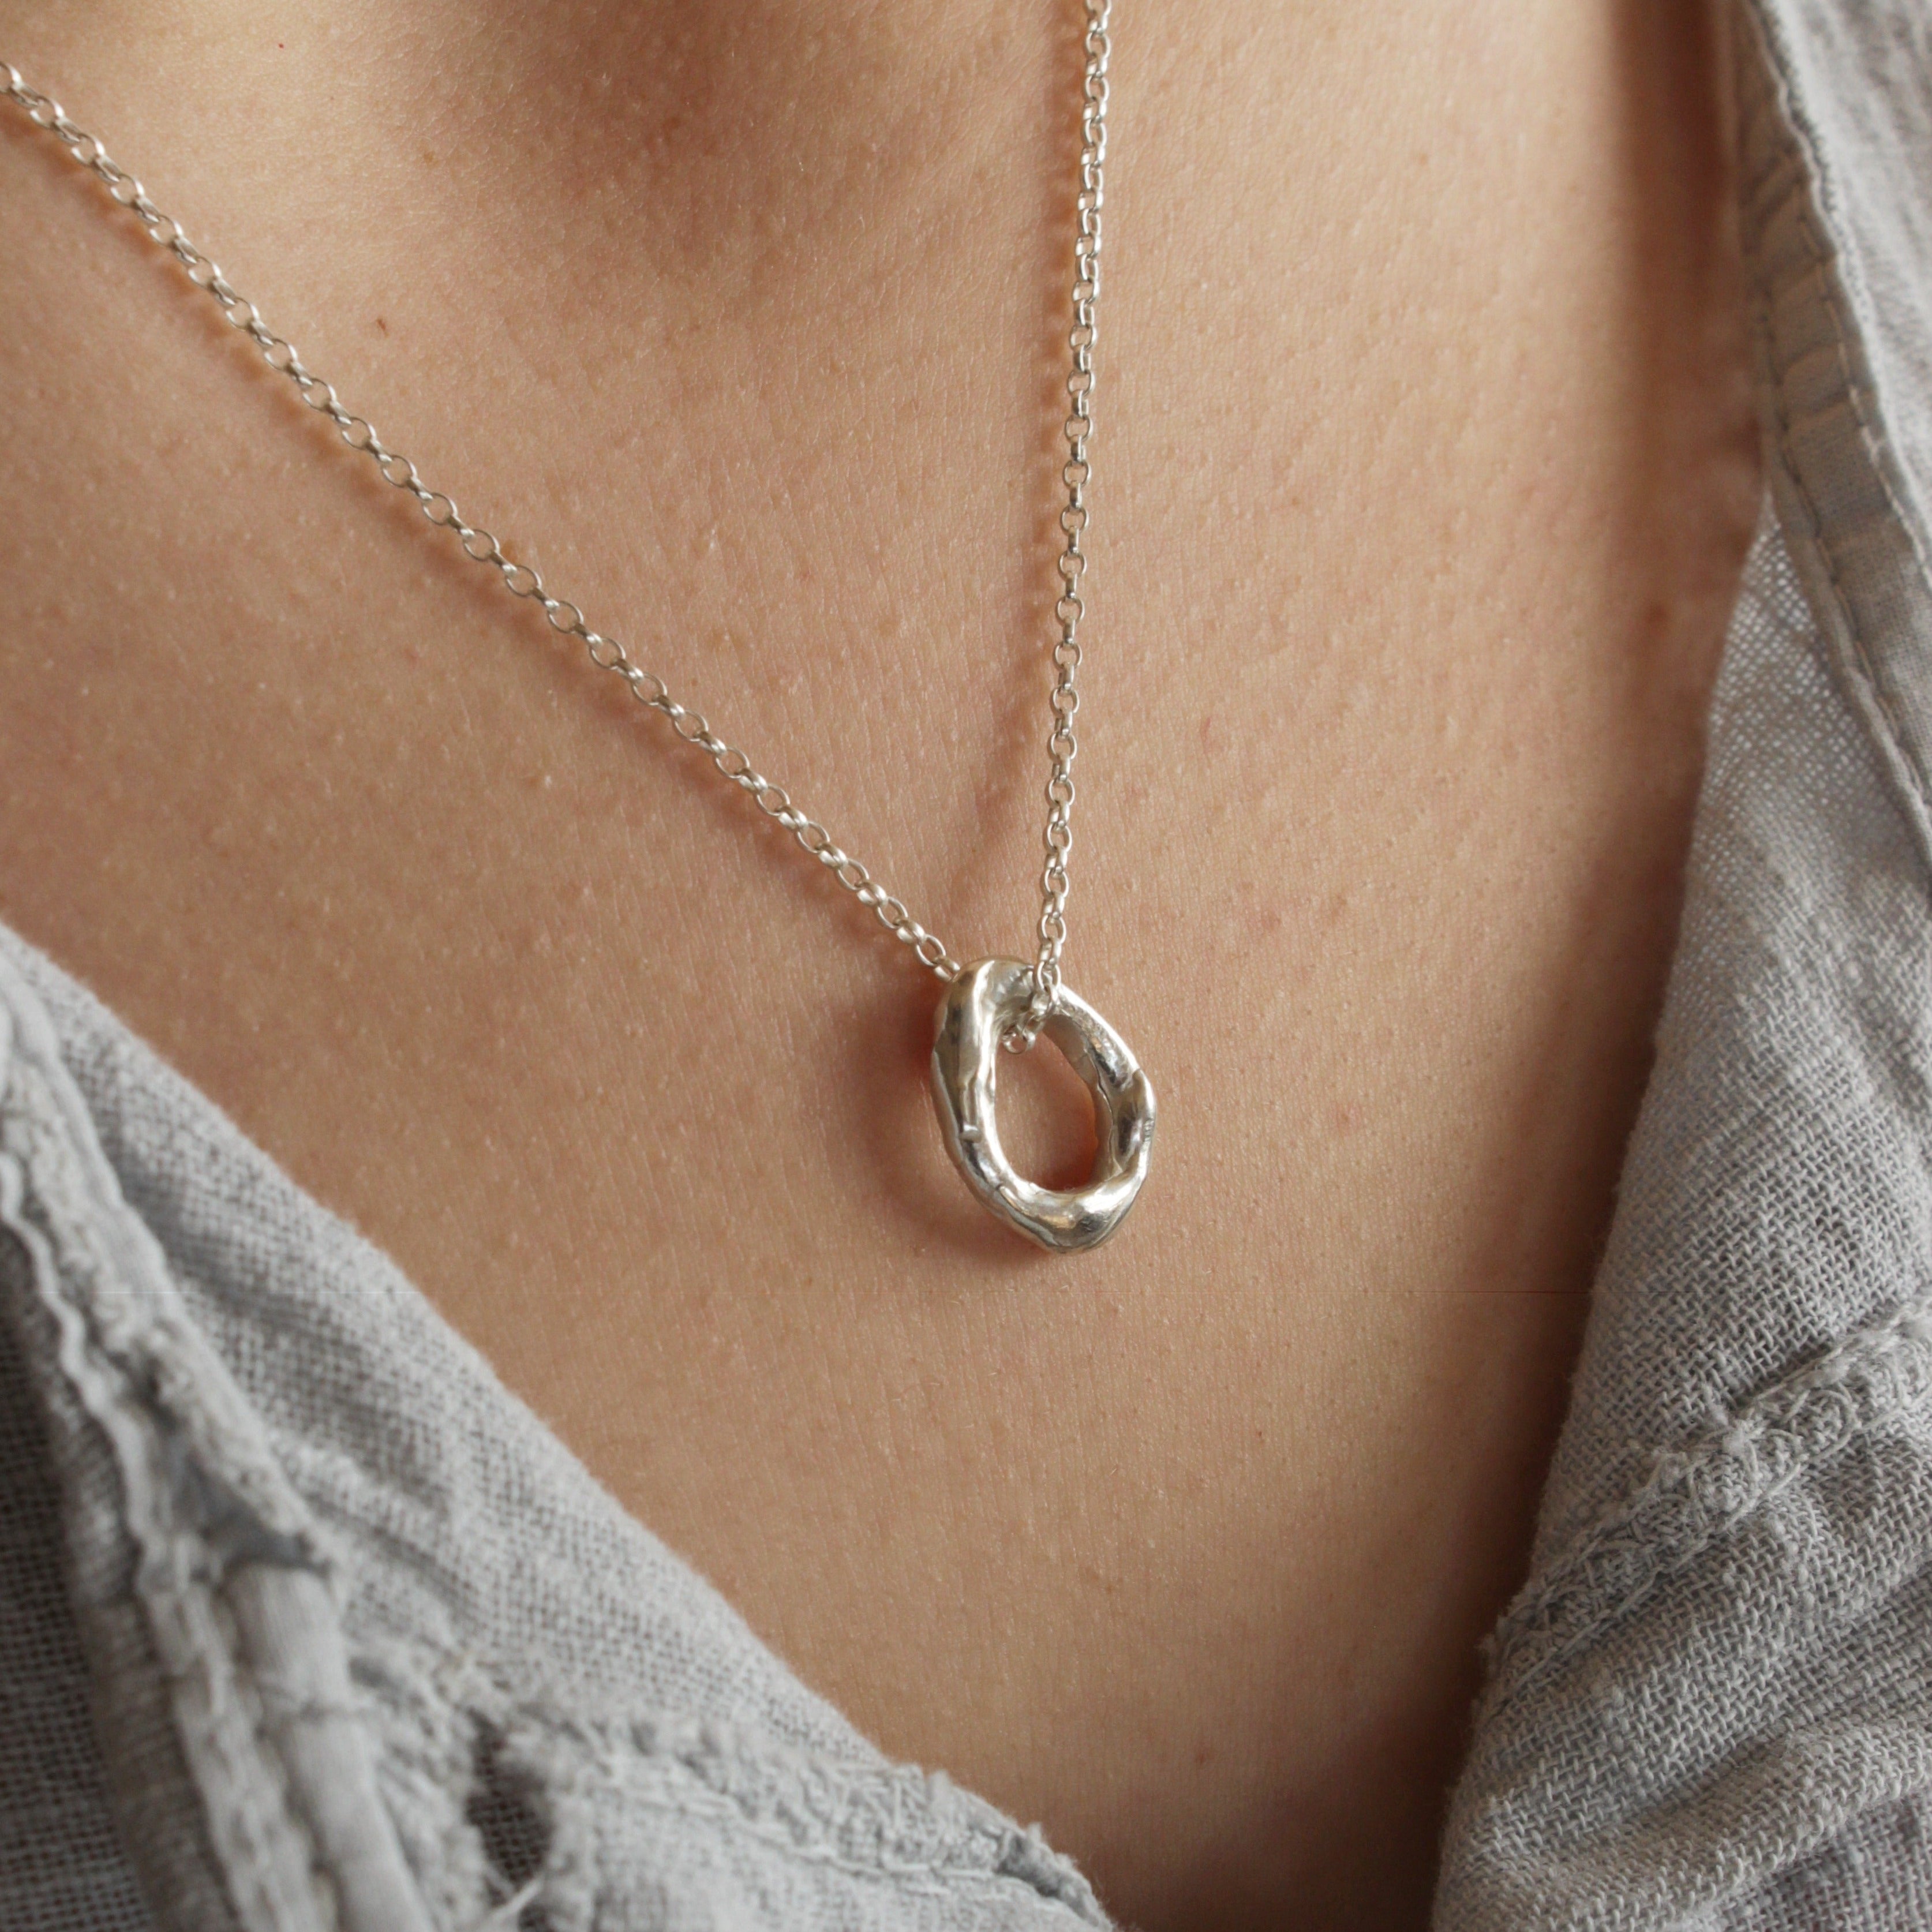 The delicate Cara pendant has been mindfully designed to help soothe anxiety with its tactile shape and movement. Hold the pendant between finger and thumb as a reminder to take time for yourself and breathe deeply.